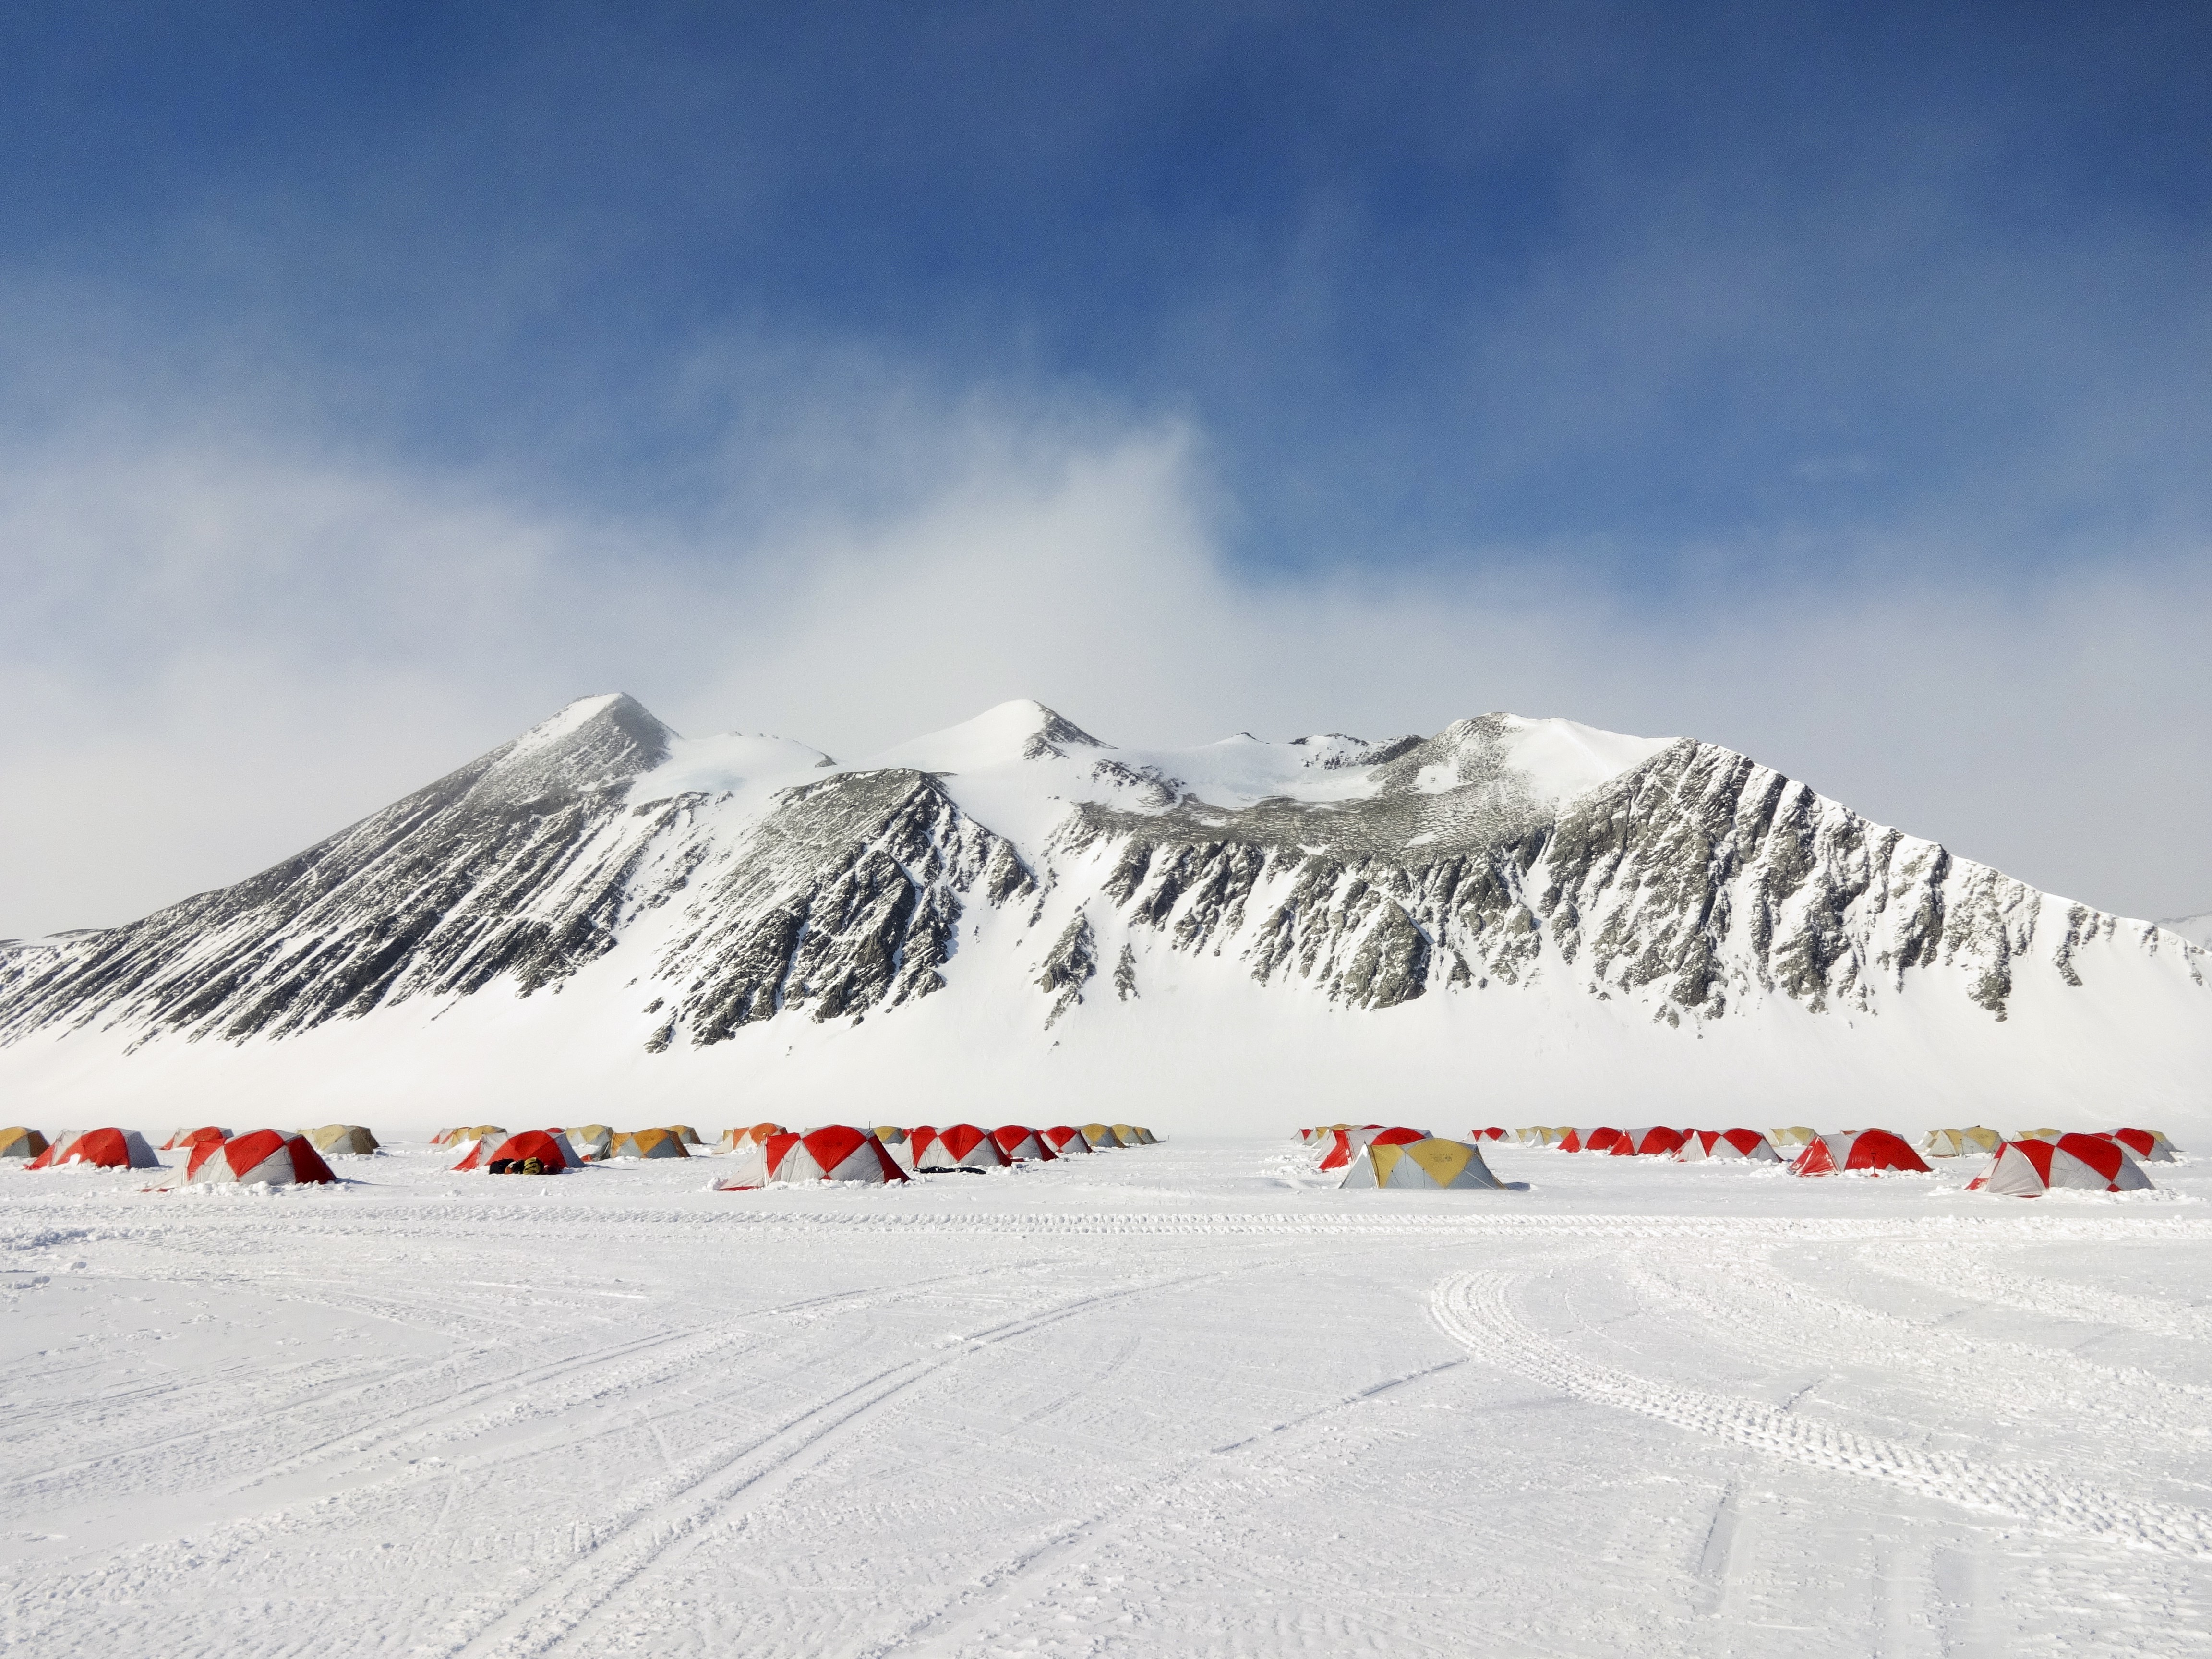 Staff accommodation area at Union Glacier Camp, with Mount Rossman behind (Foto: Photo Credit: Leslie Wicks/ALE)